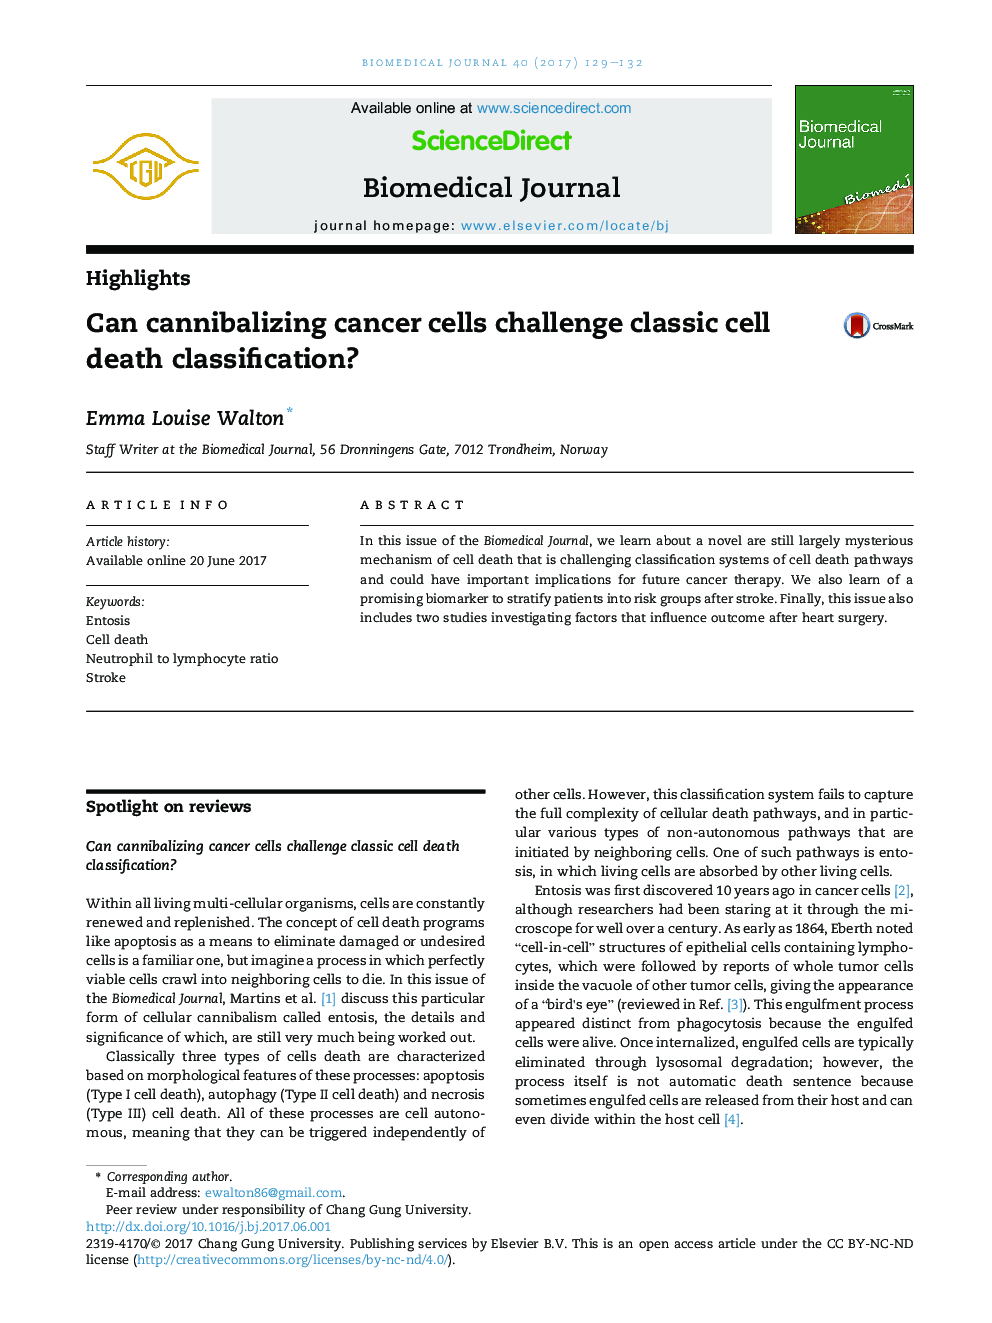 Can cannibalizing cancer cells challenge classic cell death classification?